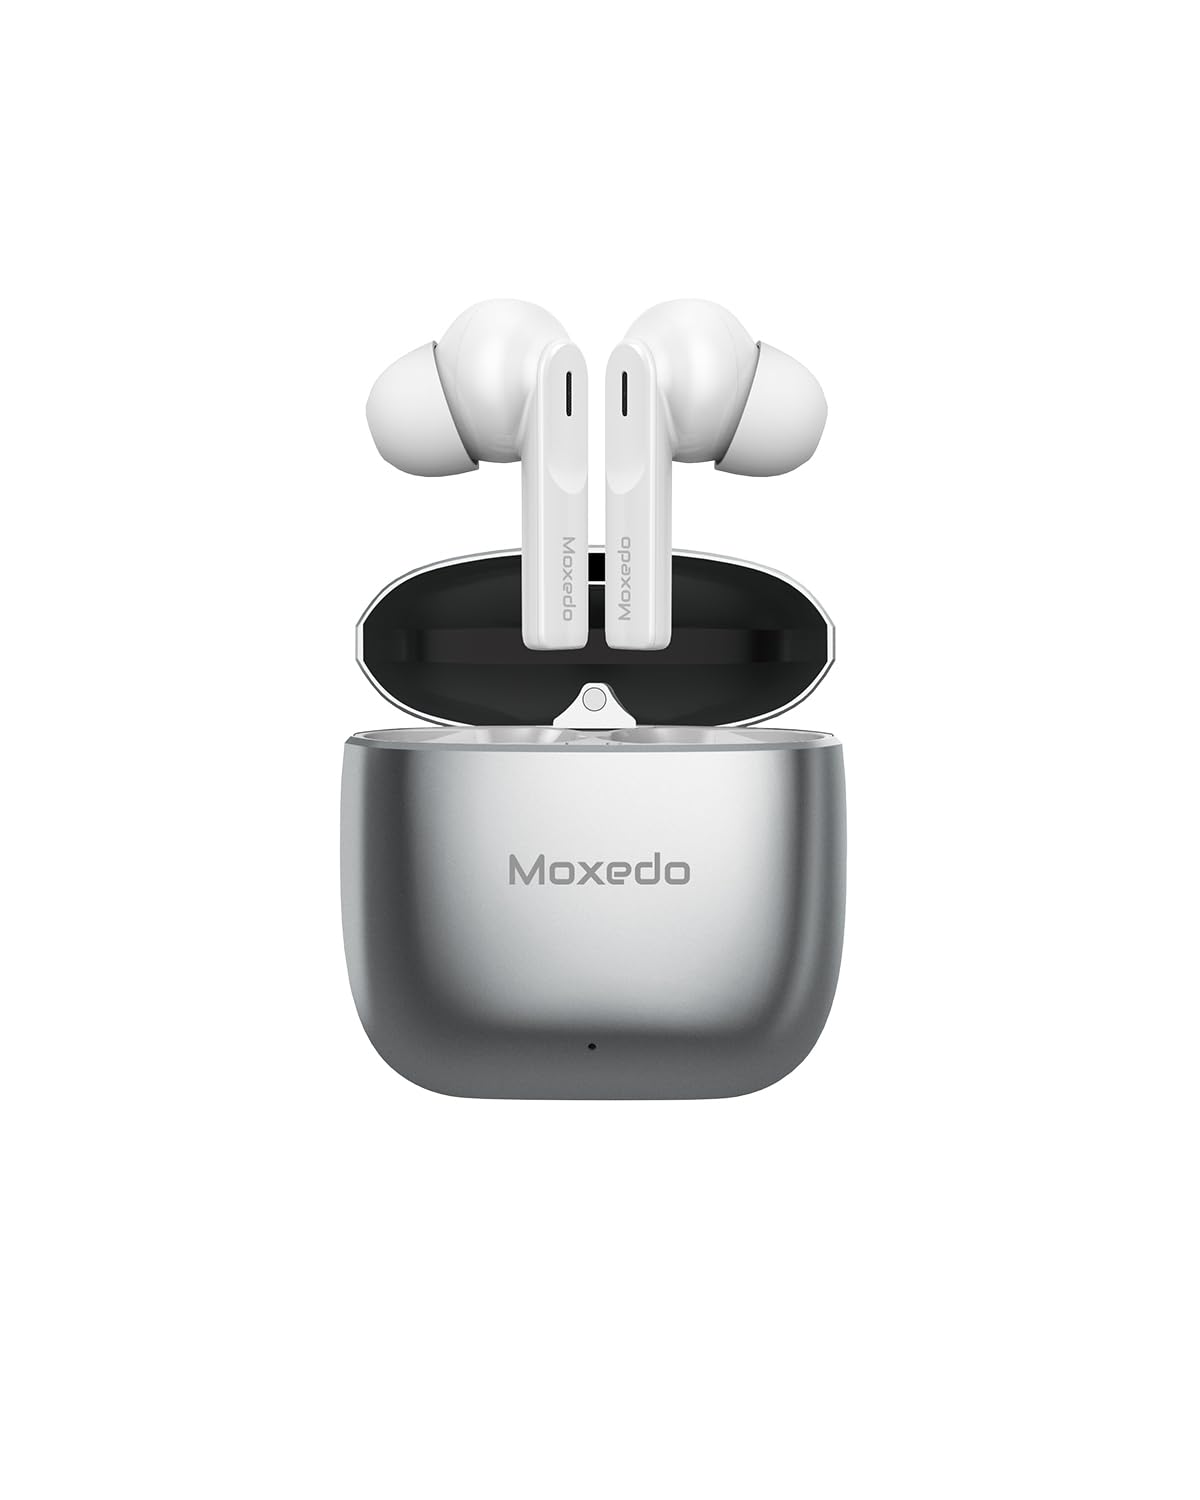 Moxedo True Tunes TWS Wireless Bluetooth Earbuds, Dual Microphone Clear Calls, IPX4 Sweat Resistance Easy Touch Control, ENC Noise Reduction Technology - Silver